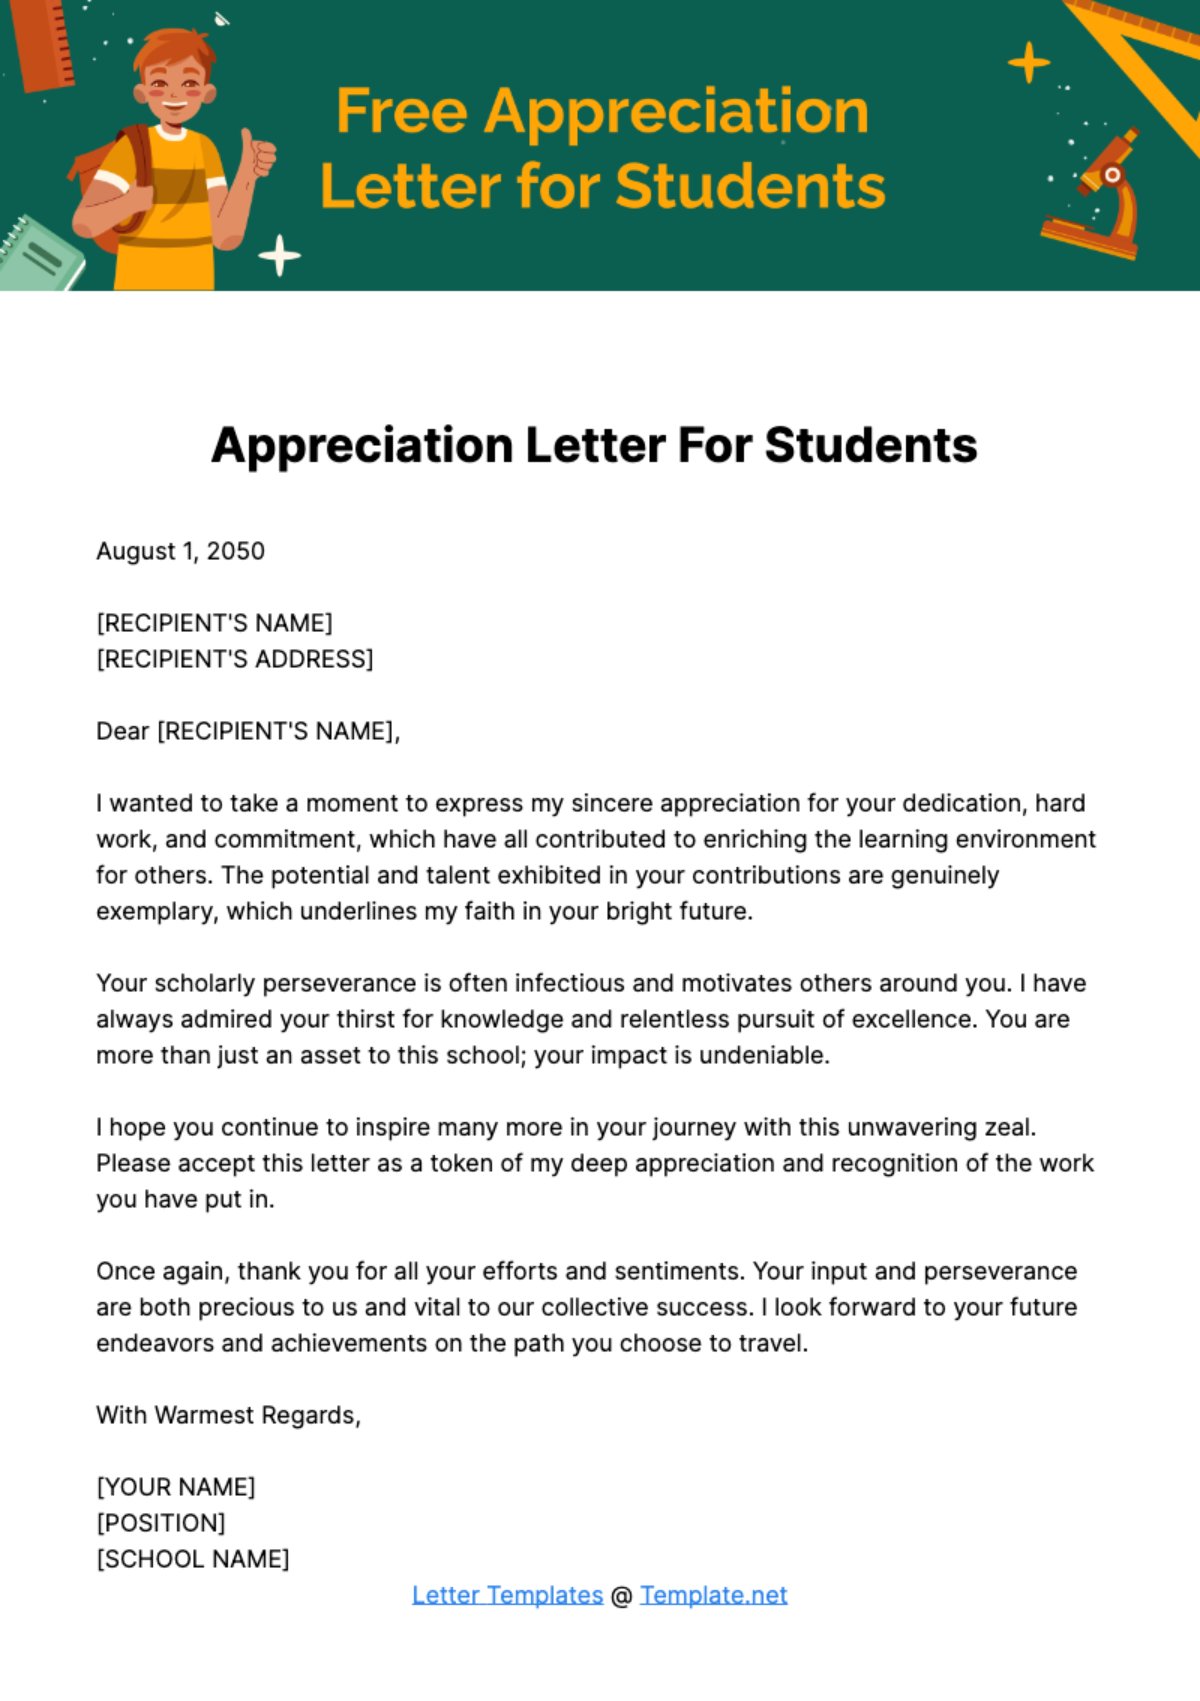 Free Appreciation Letter for Students Template